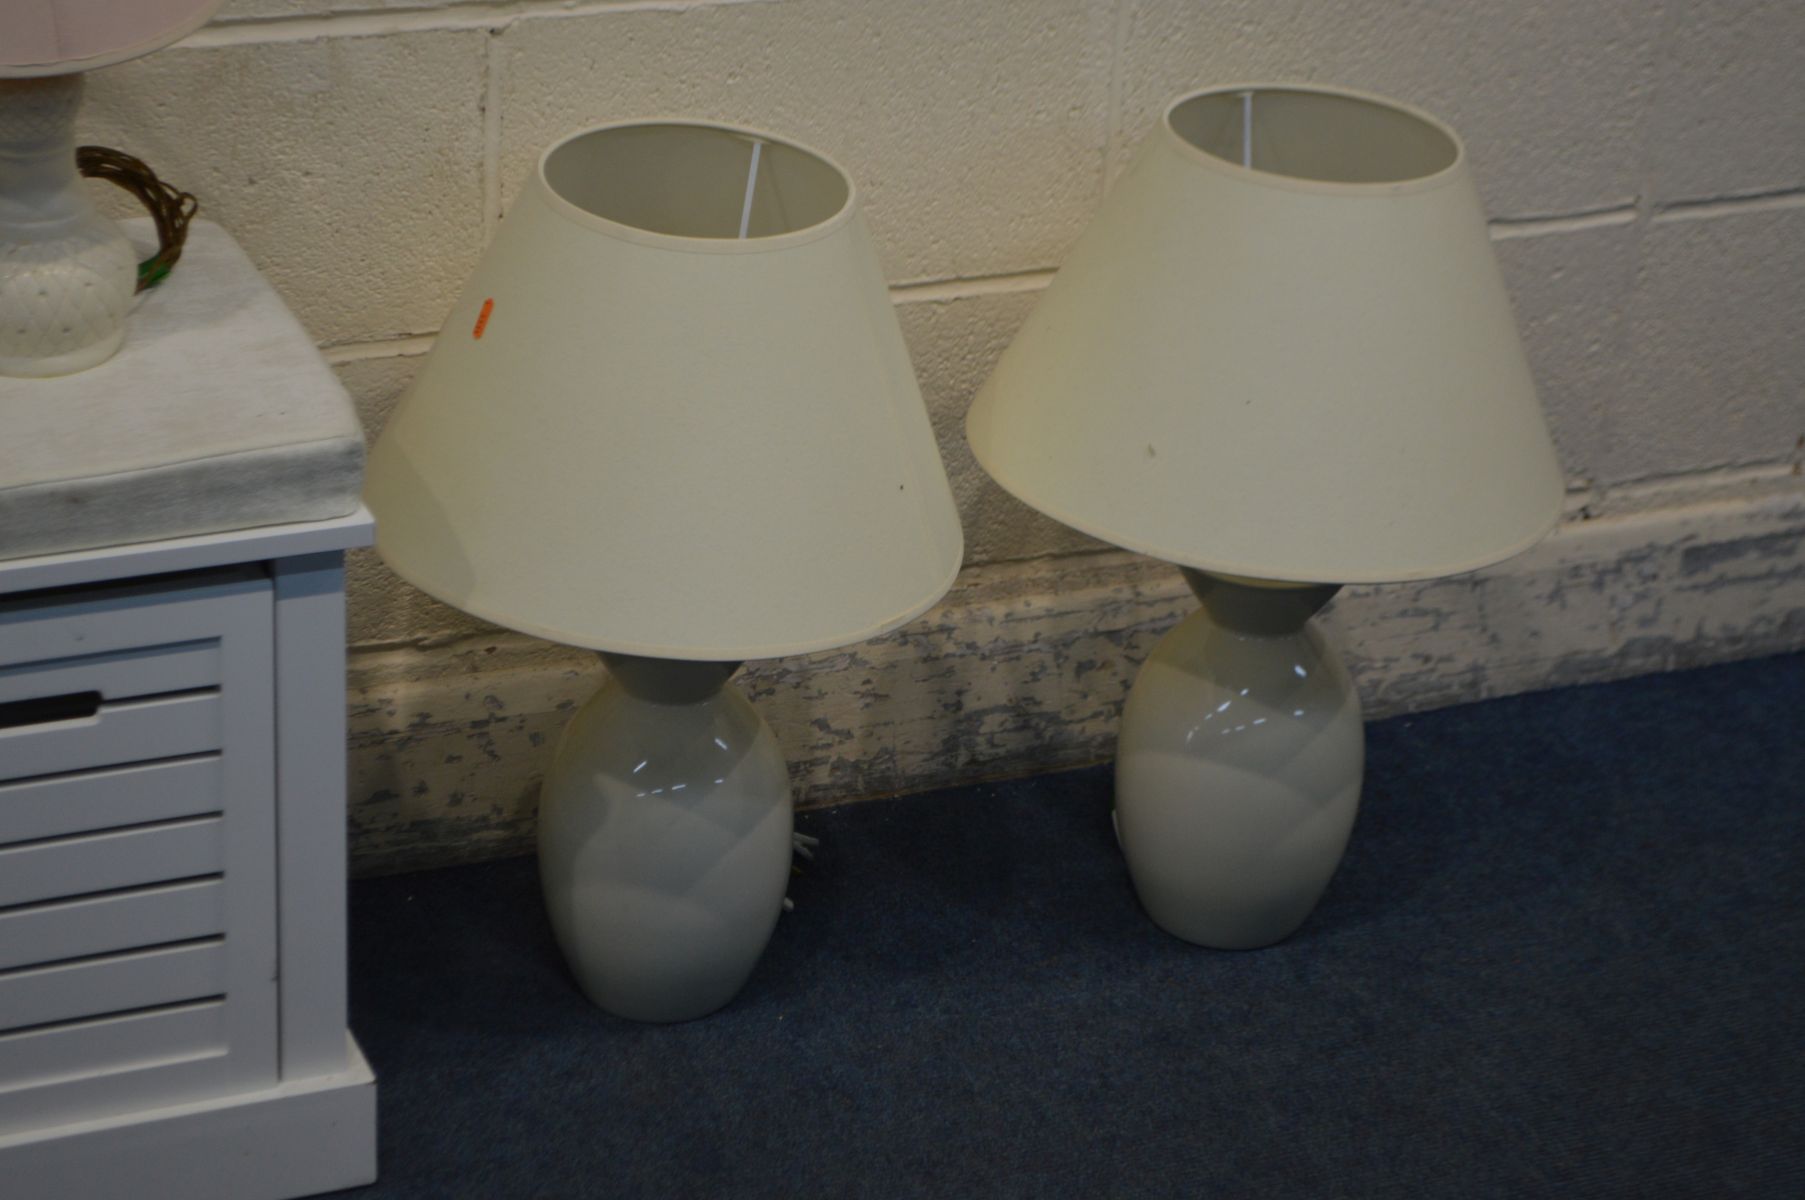 A PAIR OF MODERN CREAM CERAMIC TABLE LAMPS with shades, a modern white finish window seat with three - Image 3 of 3